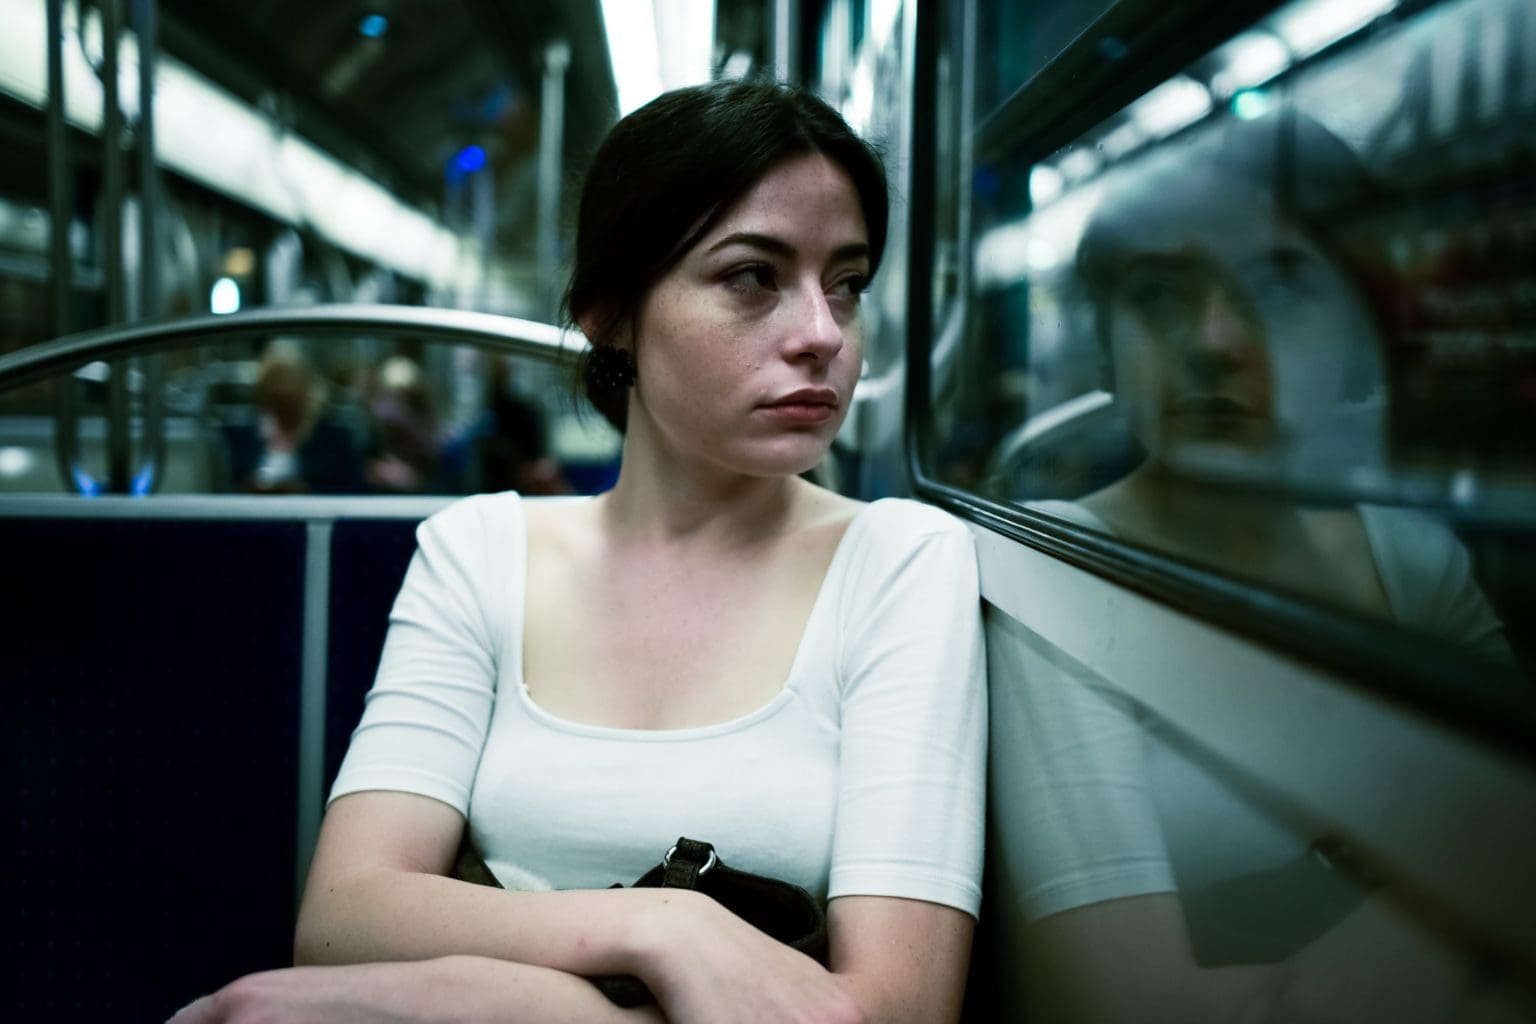 Woman on bus or train looking out of window solemnly